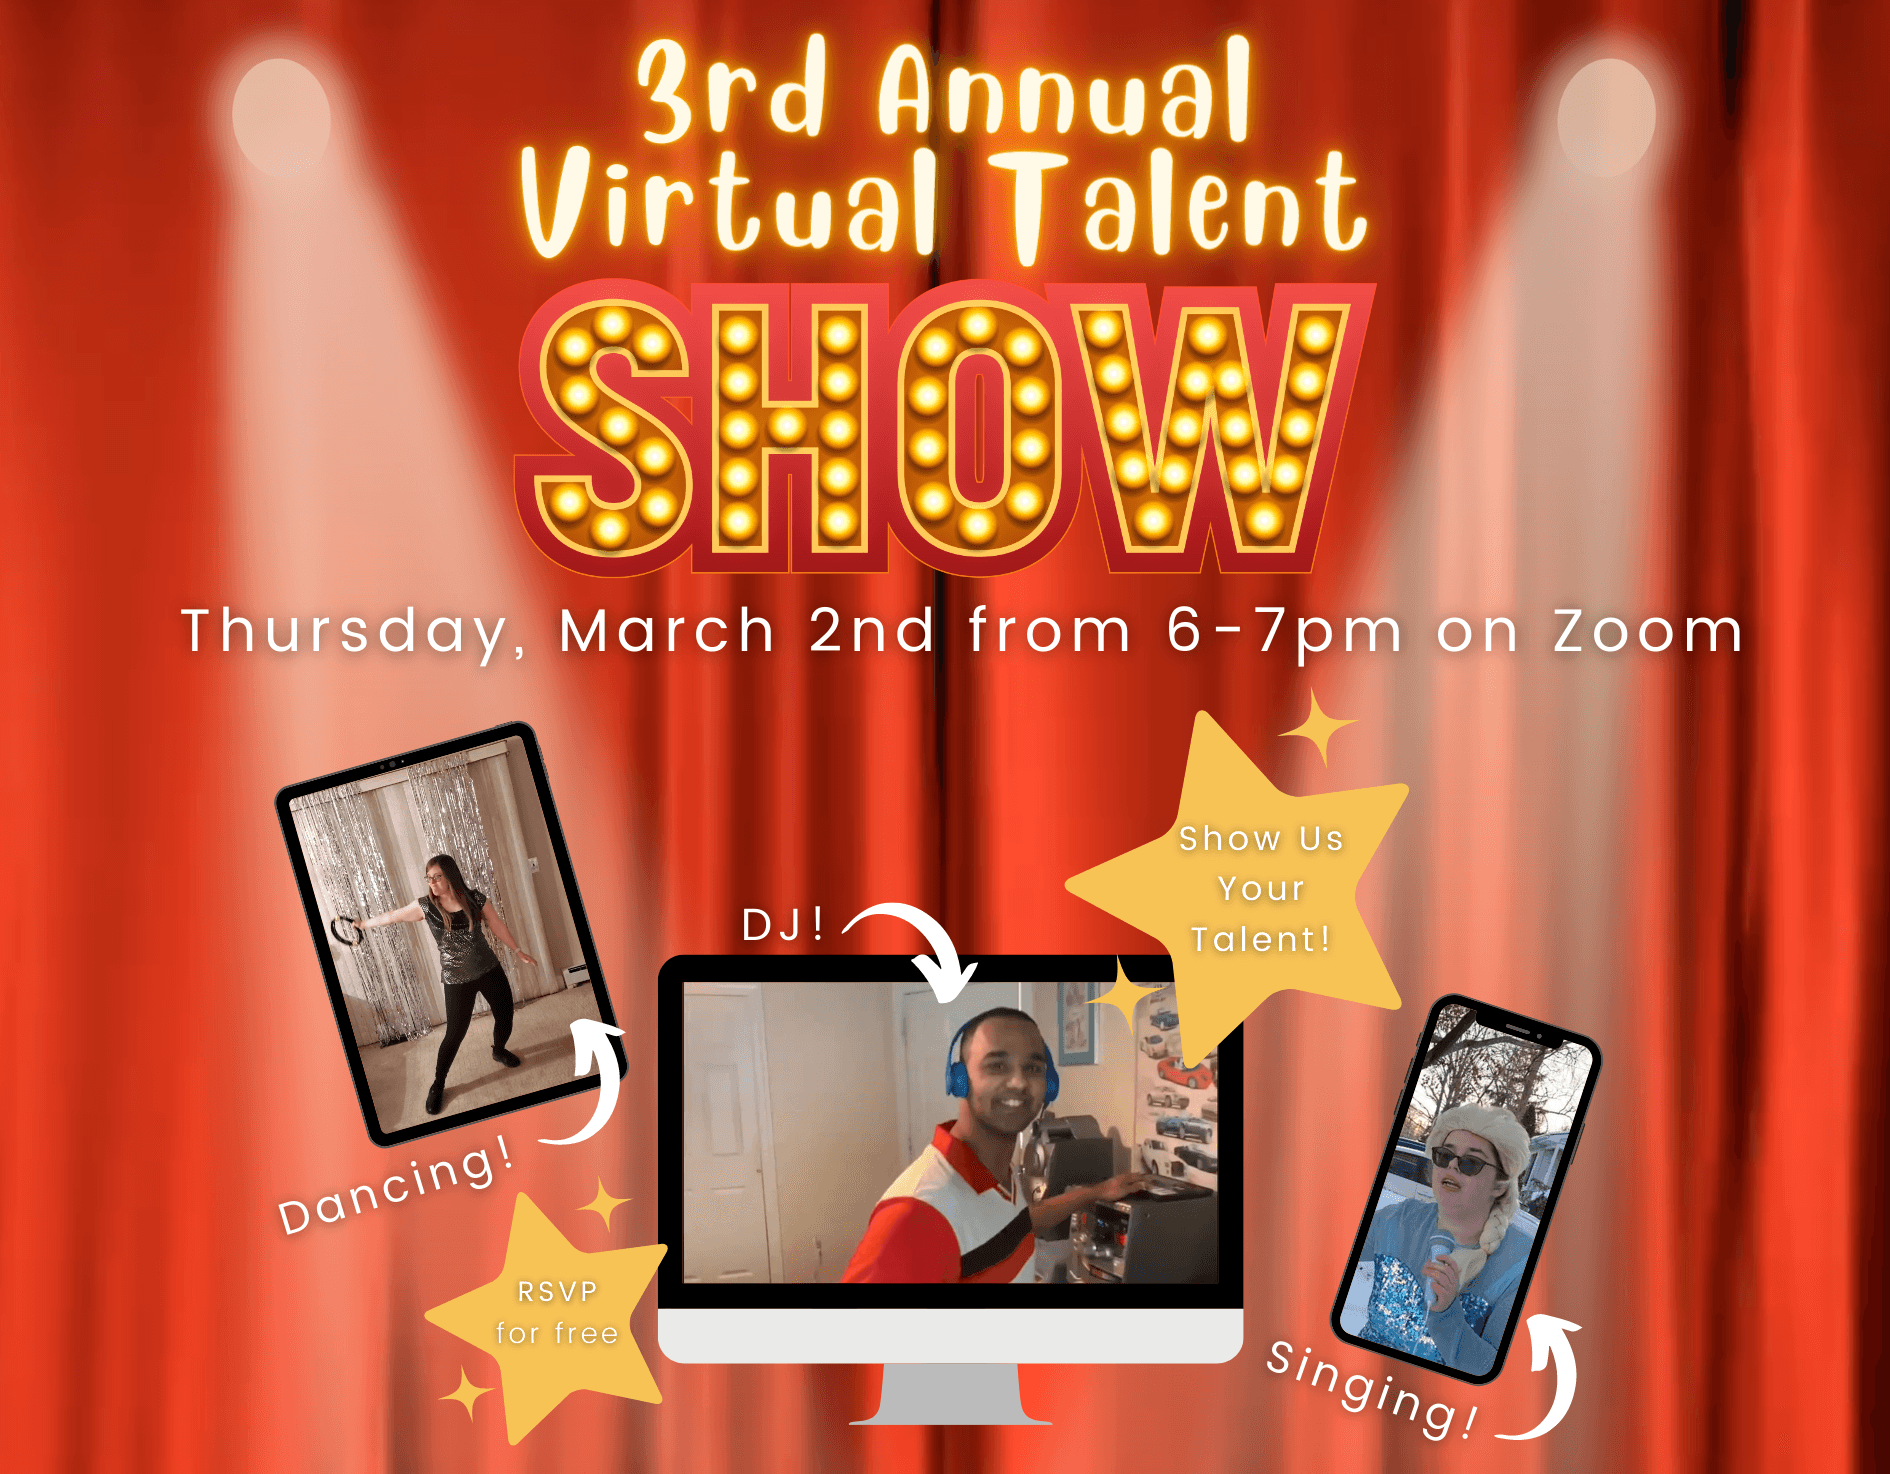 Photo of red curtains and talent show performances with title "3rd Annual Virtual Talent Show"